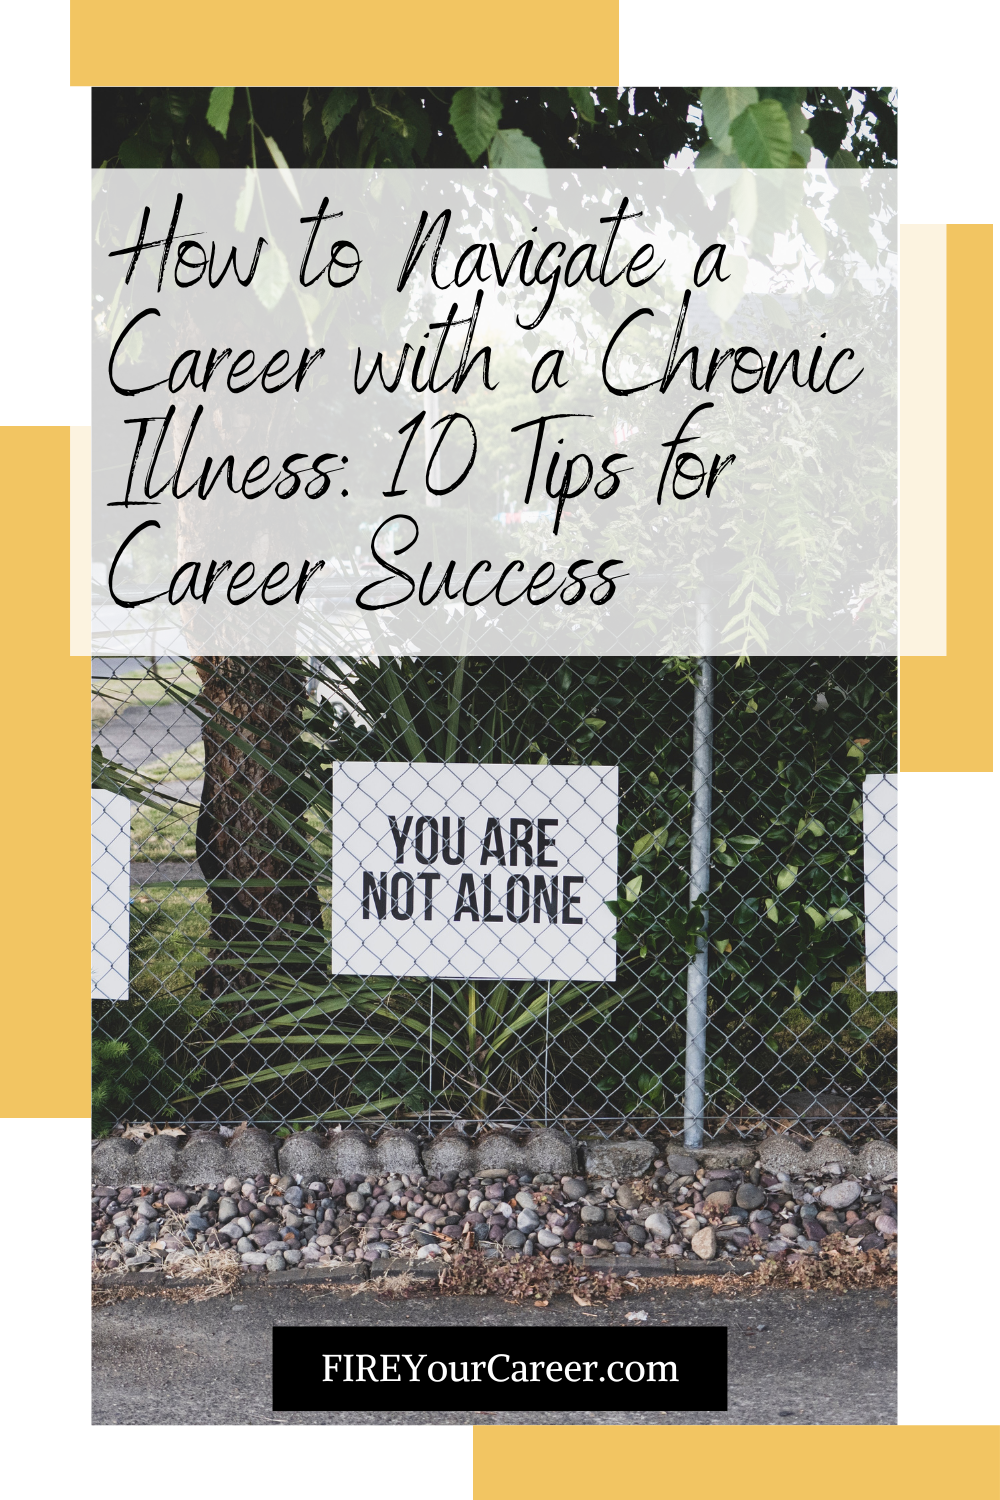 How to Navigate a Career with a Chronic Illness 10 Tips for Career Success Pinterest